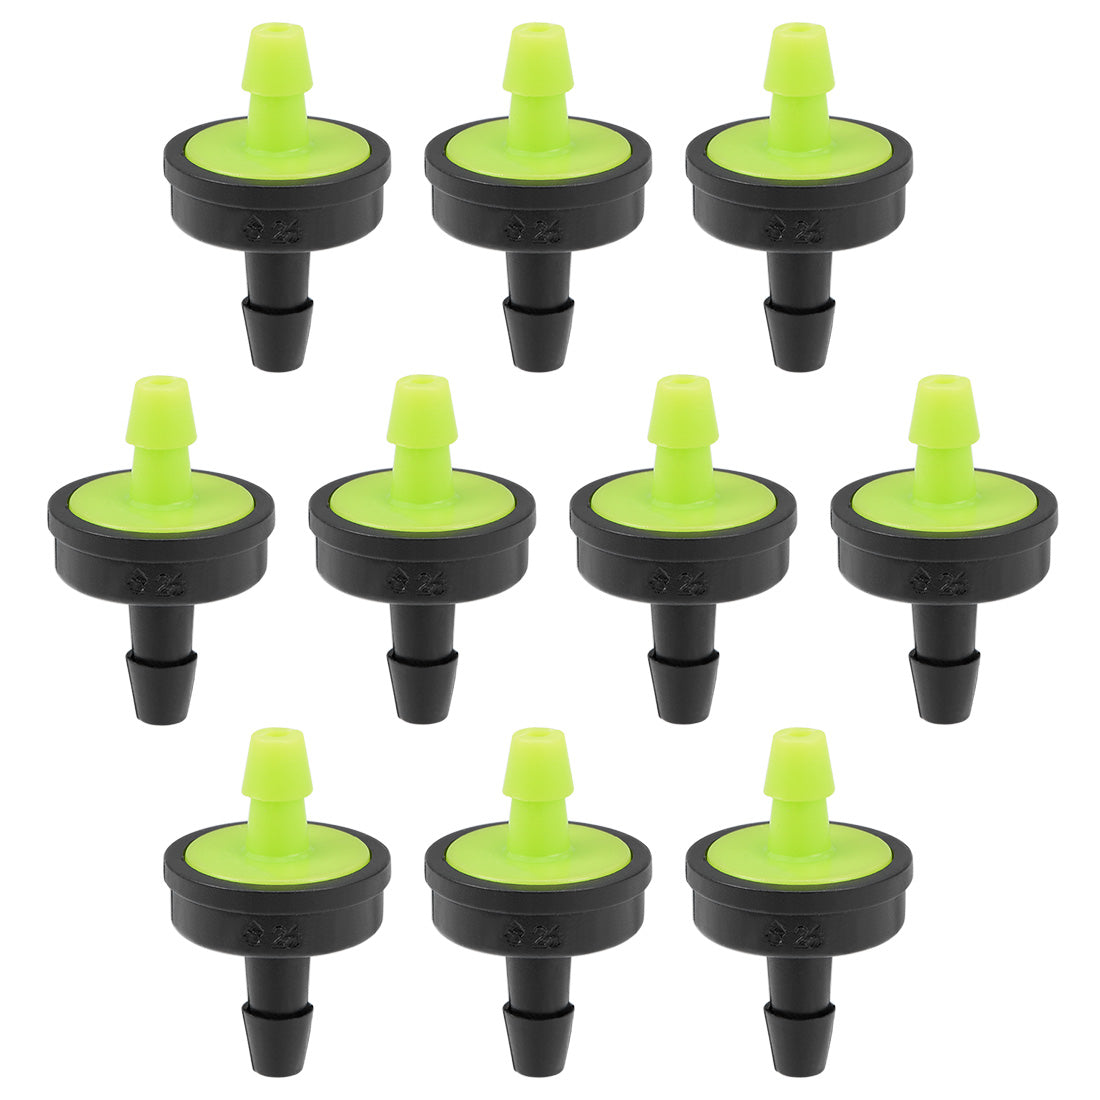 uxcell Uxcell Pressure Compensating Dripper 8GPH 30L/H Emitter for Garden Lawn Drip Irrigation with Barbed Hose Connector Plastic Green 20pcs